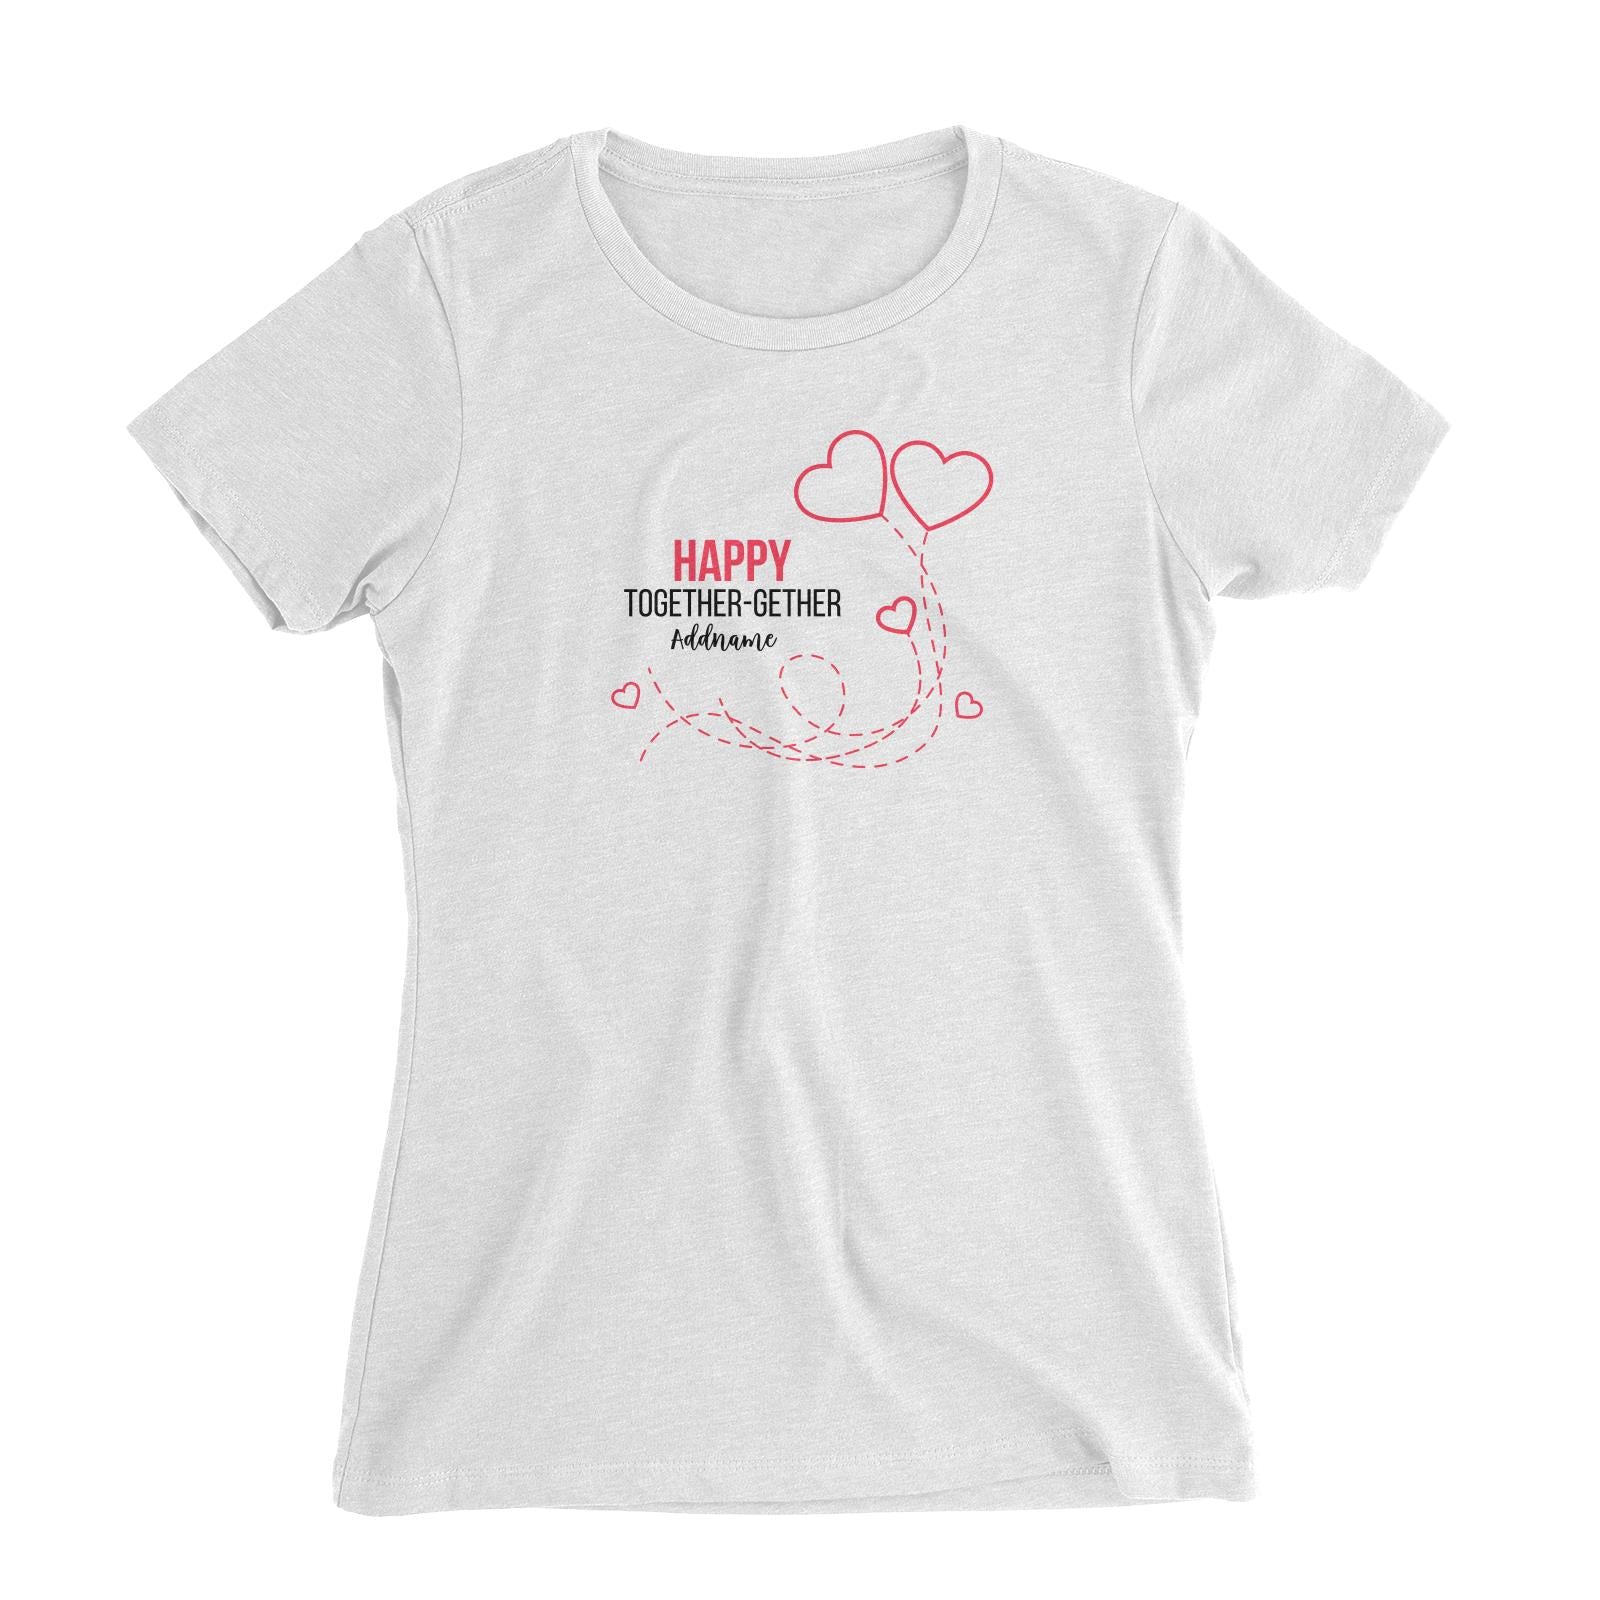 Happy Together Gether with Hearts Women's Slim Fit T-Shirt